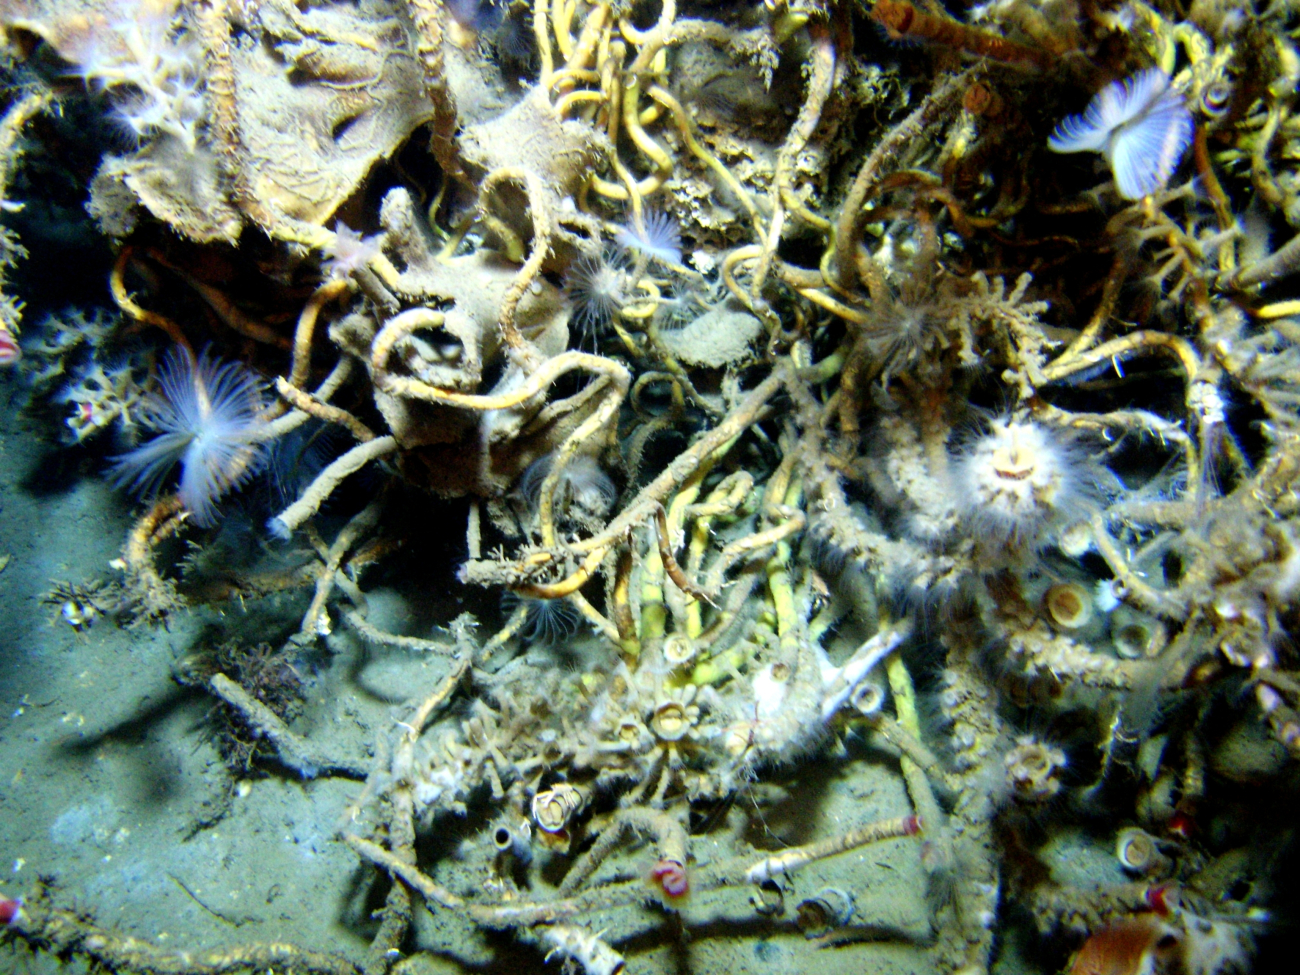 An outcrop in a cold seep area with numerous tube worms with feeding tentaclesextended intermixed with cold seep lamellibrachian tube worms with red tips